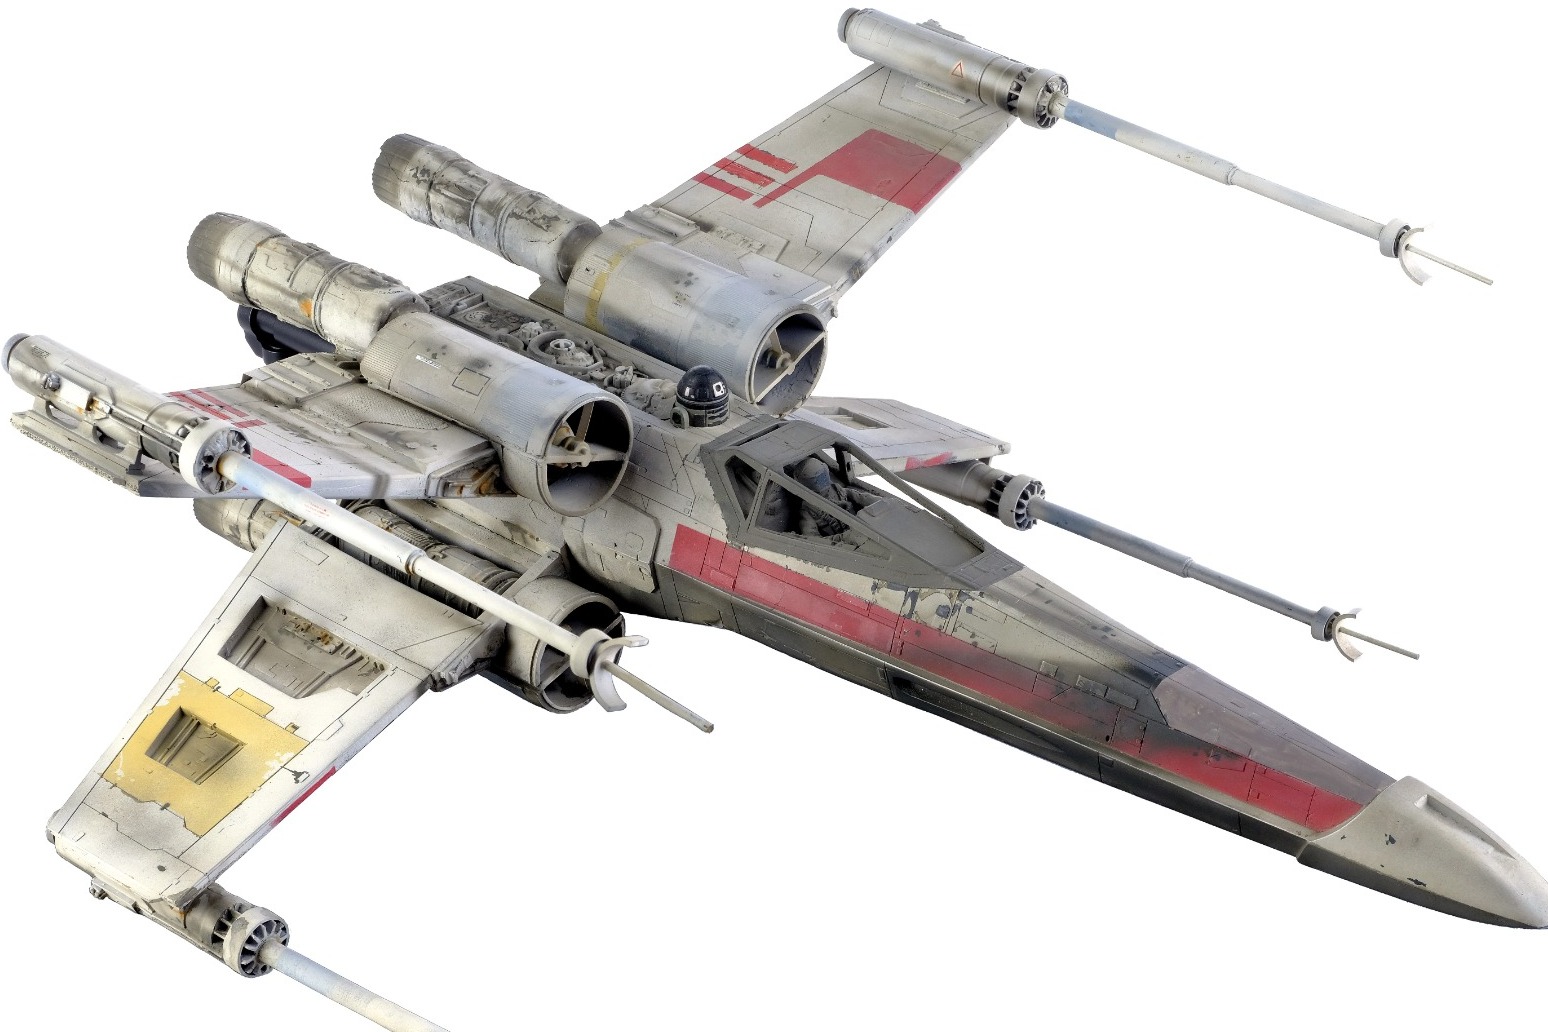 Model miniature Star Wars starfighter worth up to £800,000 to go up for auction 